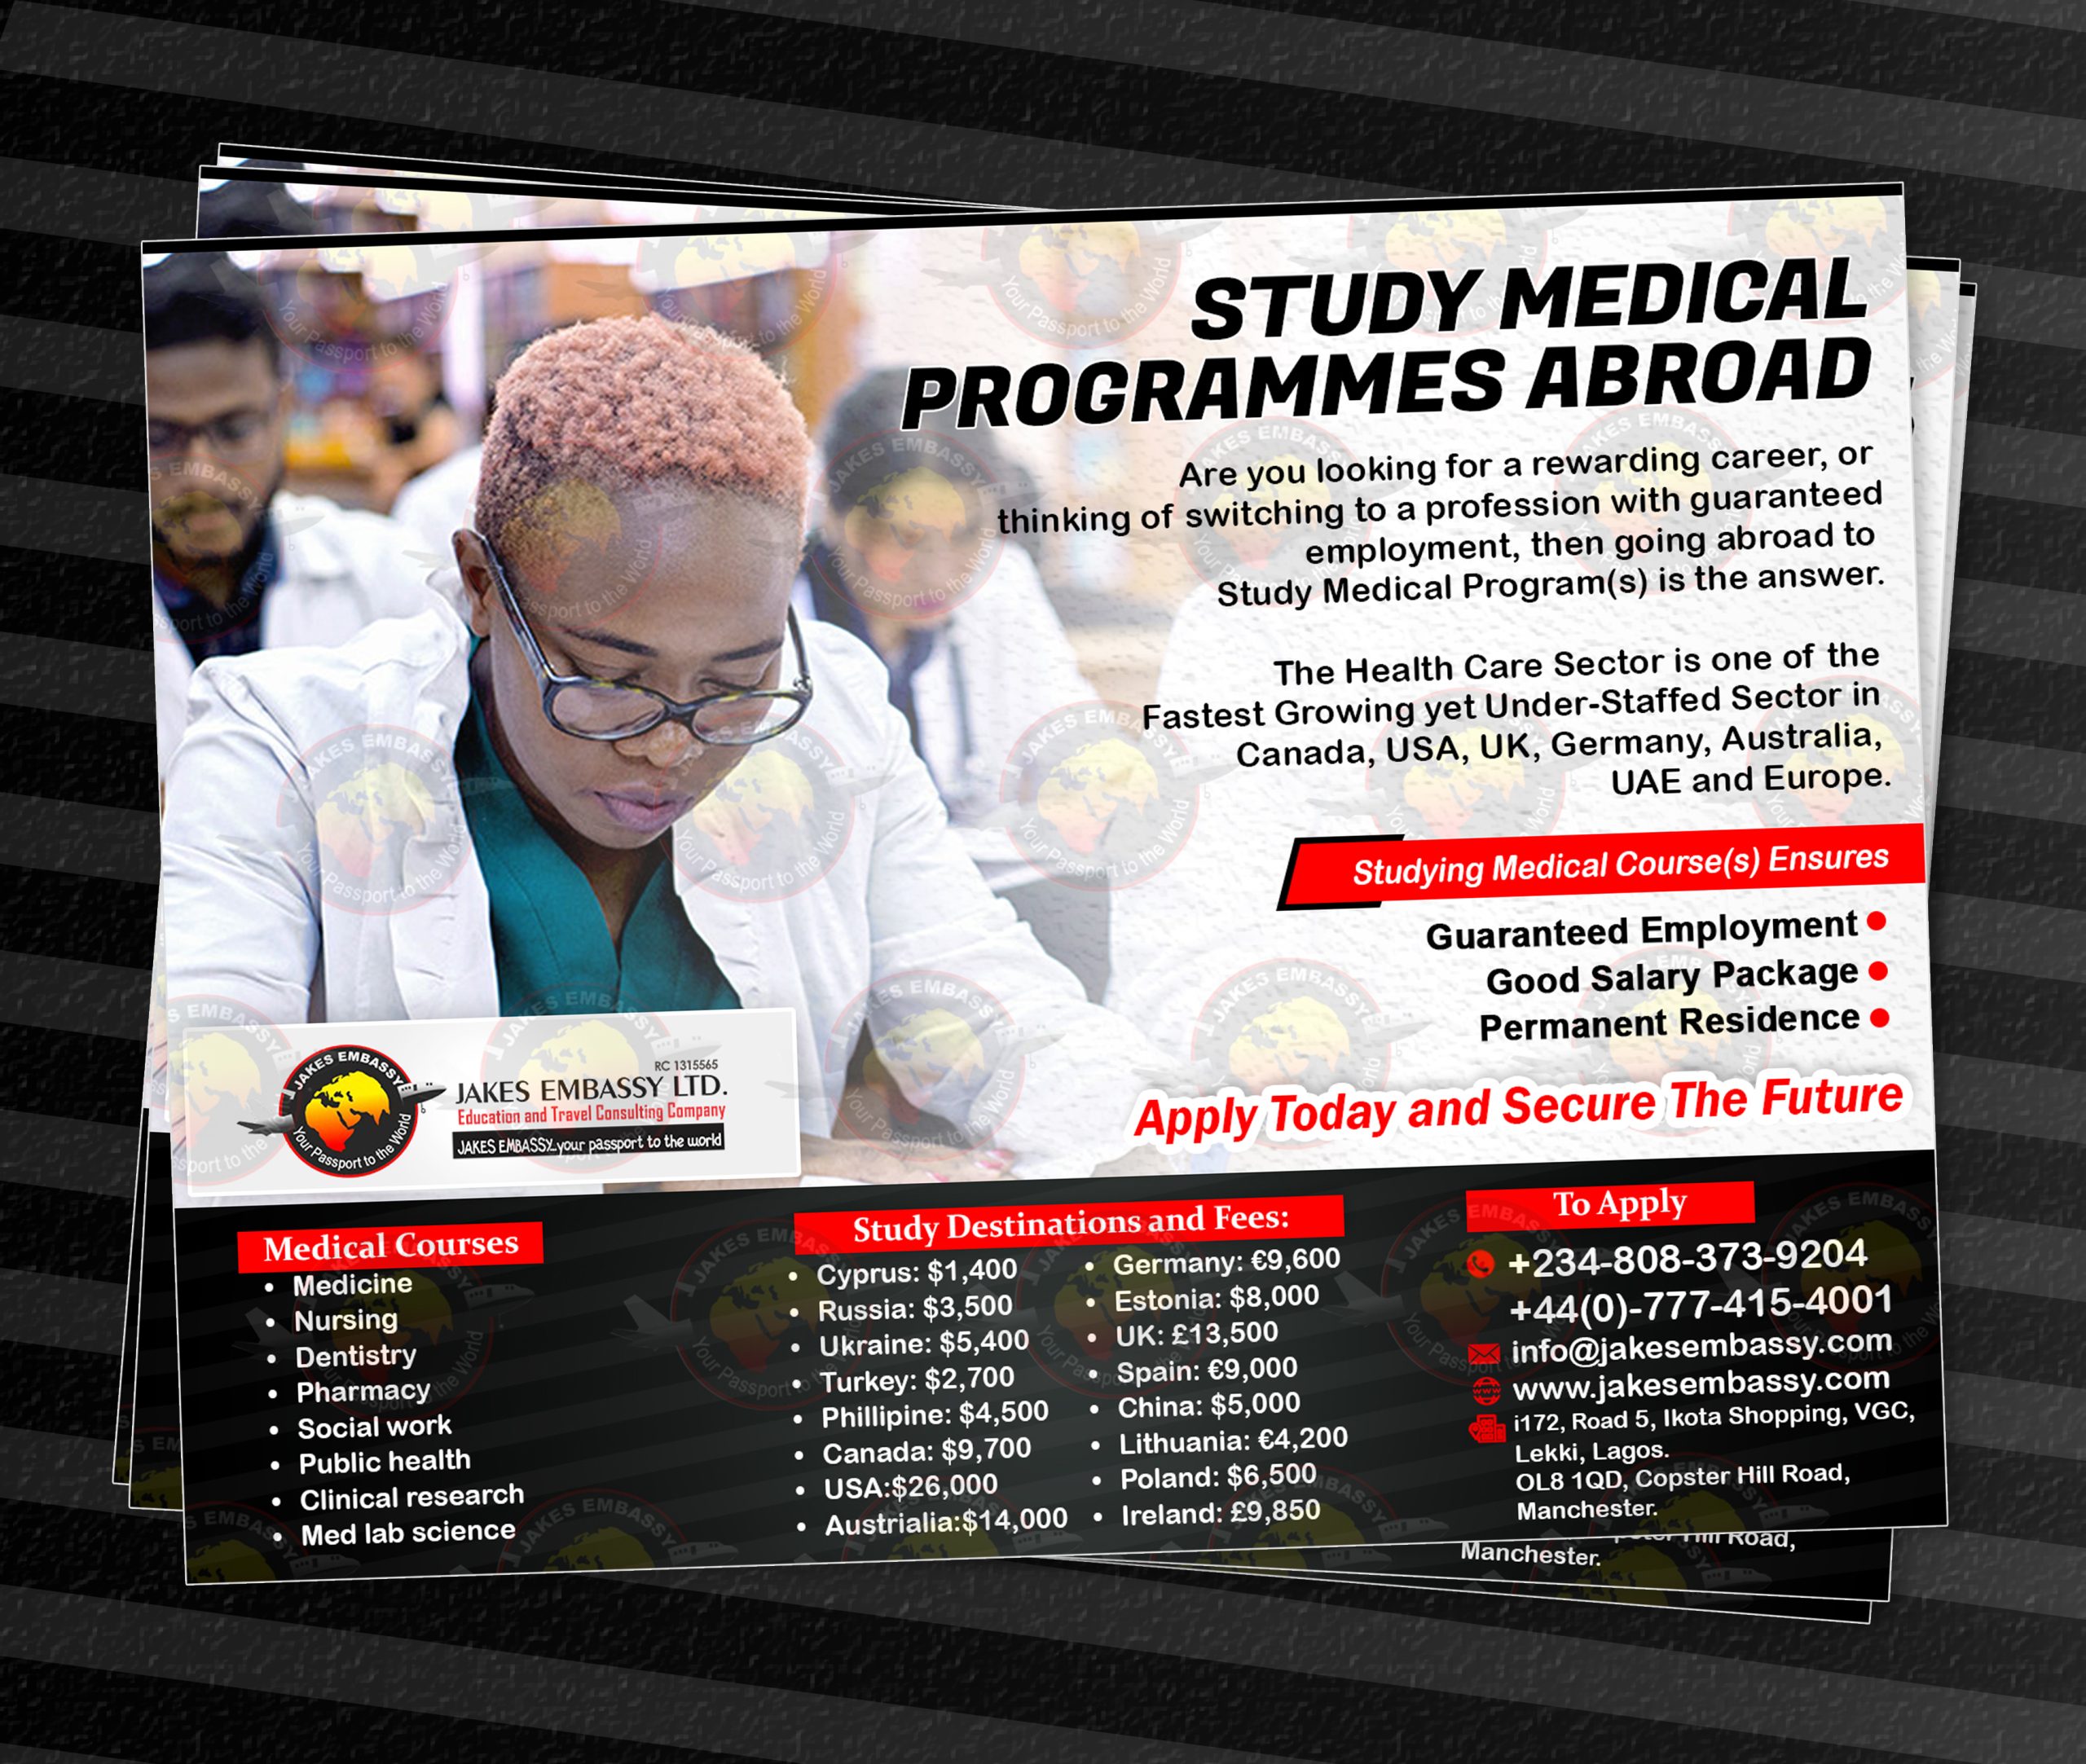 The World Needs More Doctors / Medical Professionals. Apply TODAY